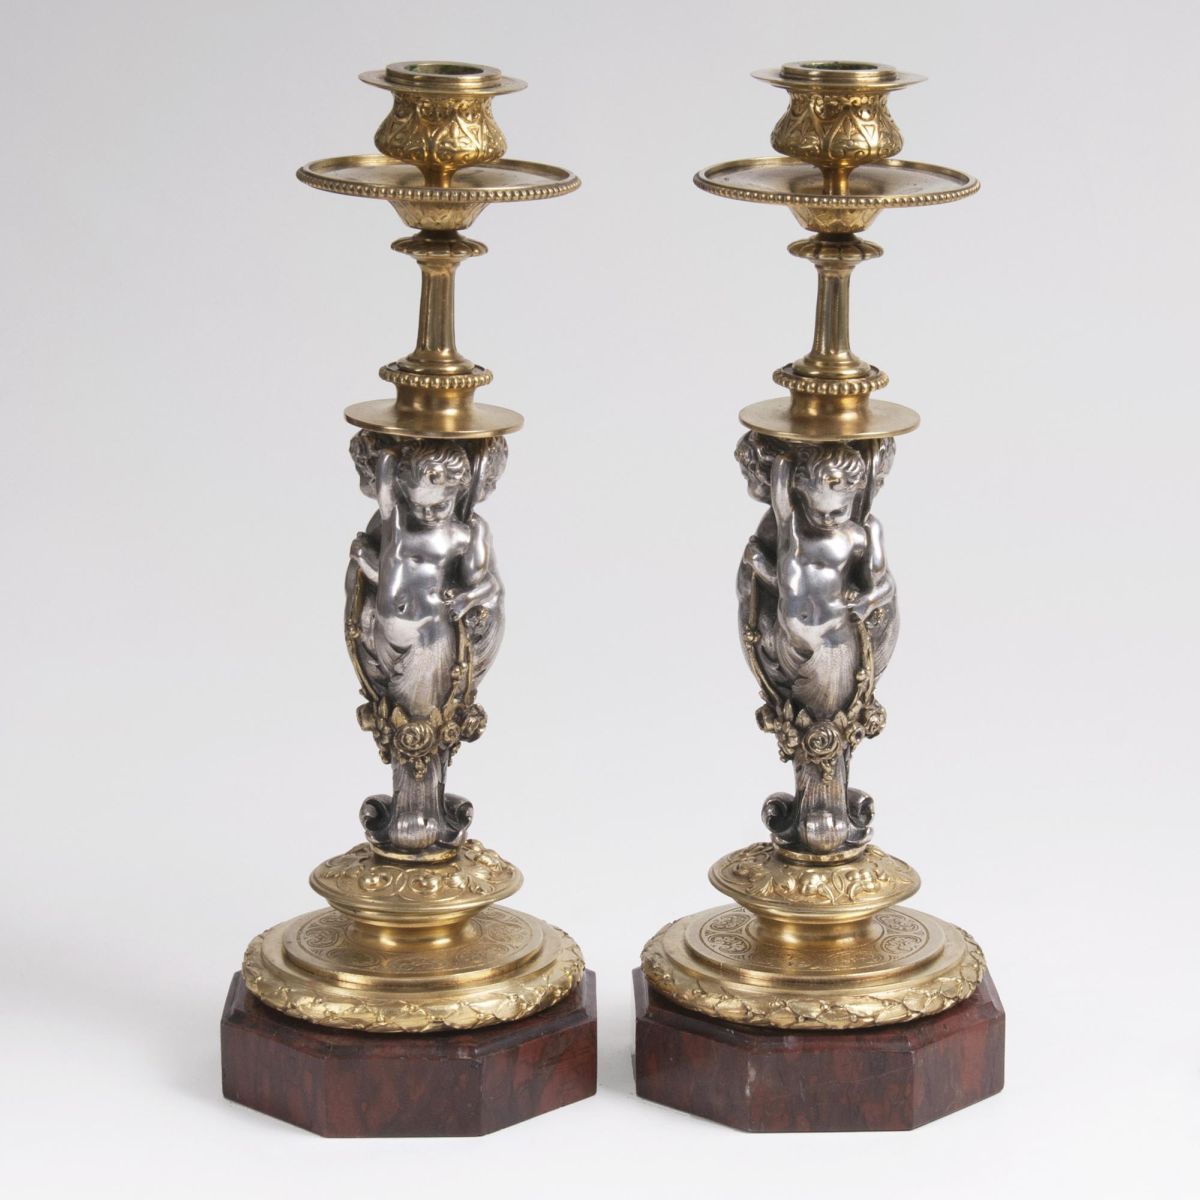 A Pair of Napoleon III Candleholders with Putto-Figures